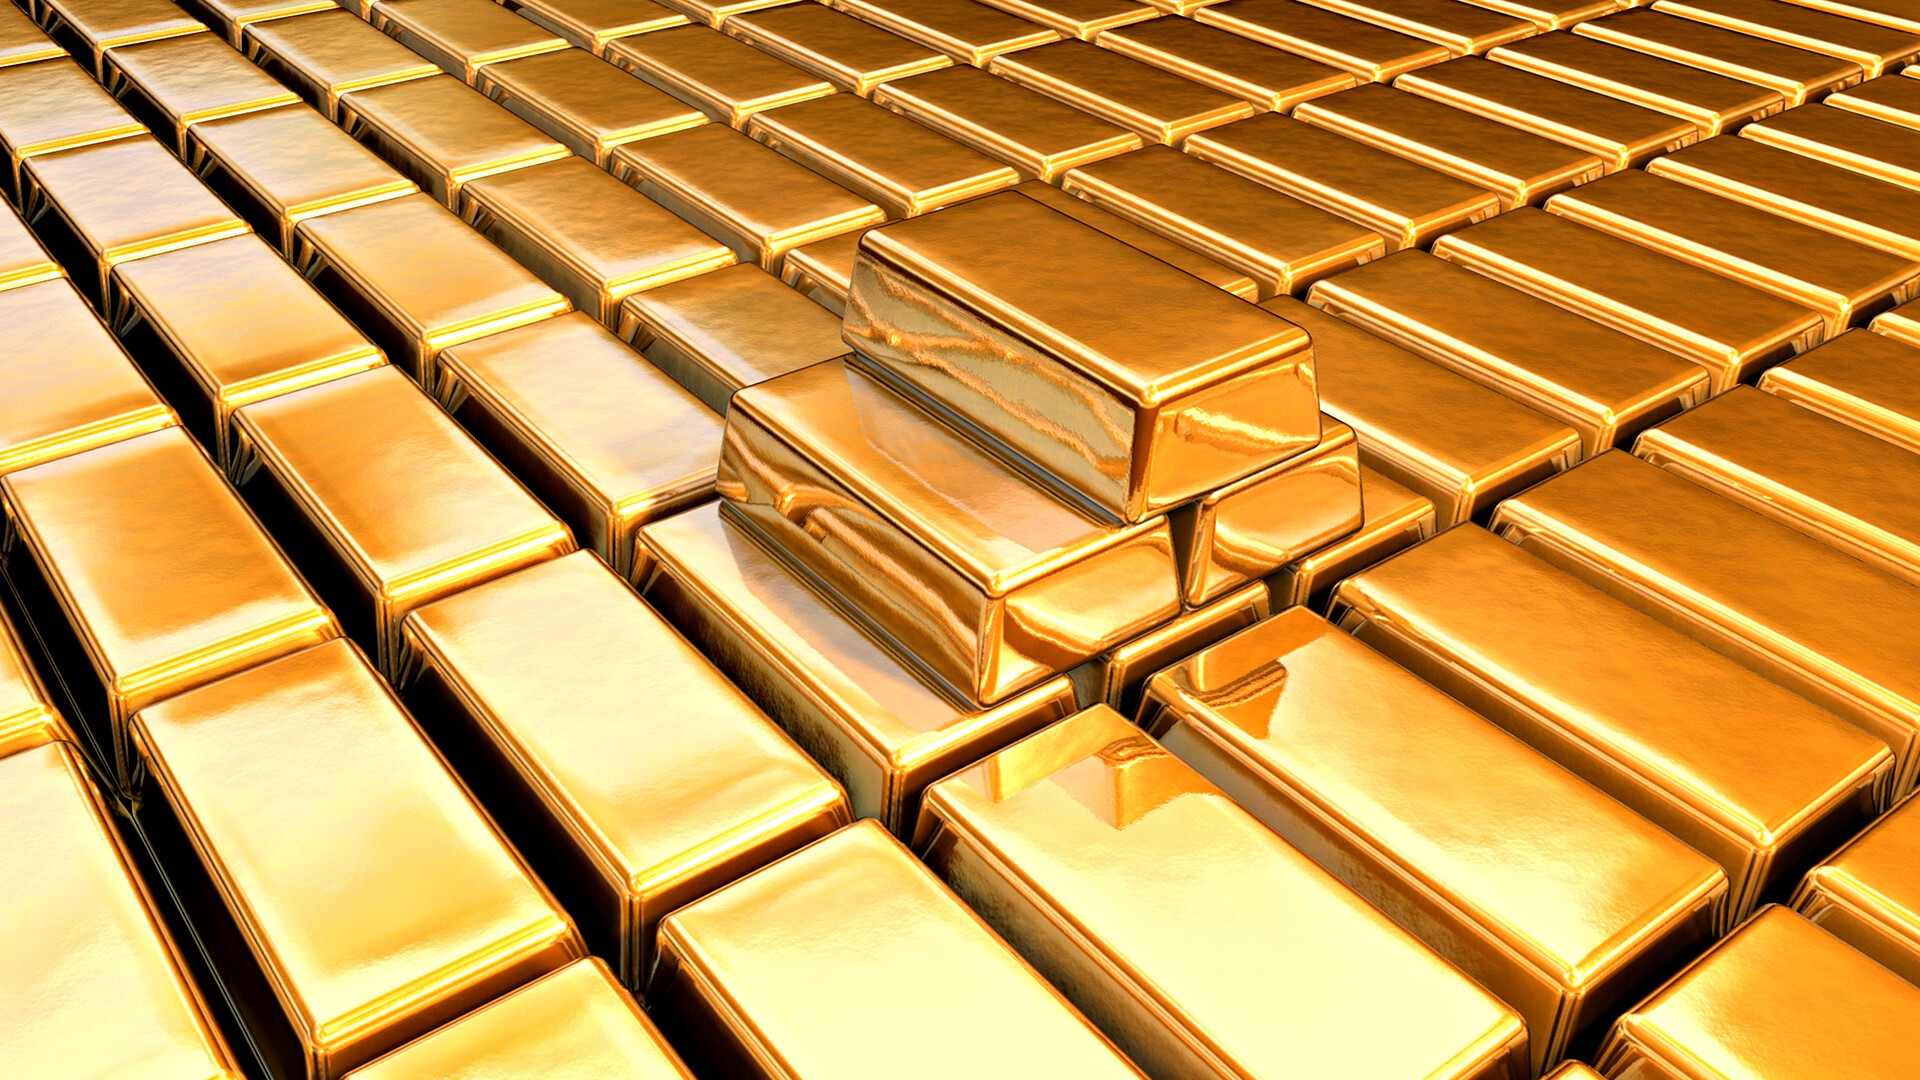 Gold: Gold bars laid out on a horizontal surface, A bulk quantity of precious metal assessed by weight and cast as ingots. 1920x1080 Full HD Wallpaper.